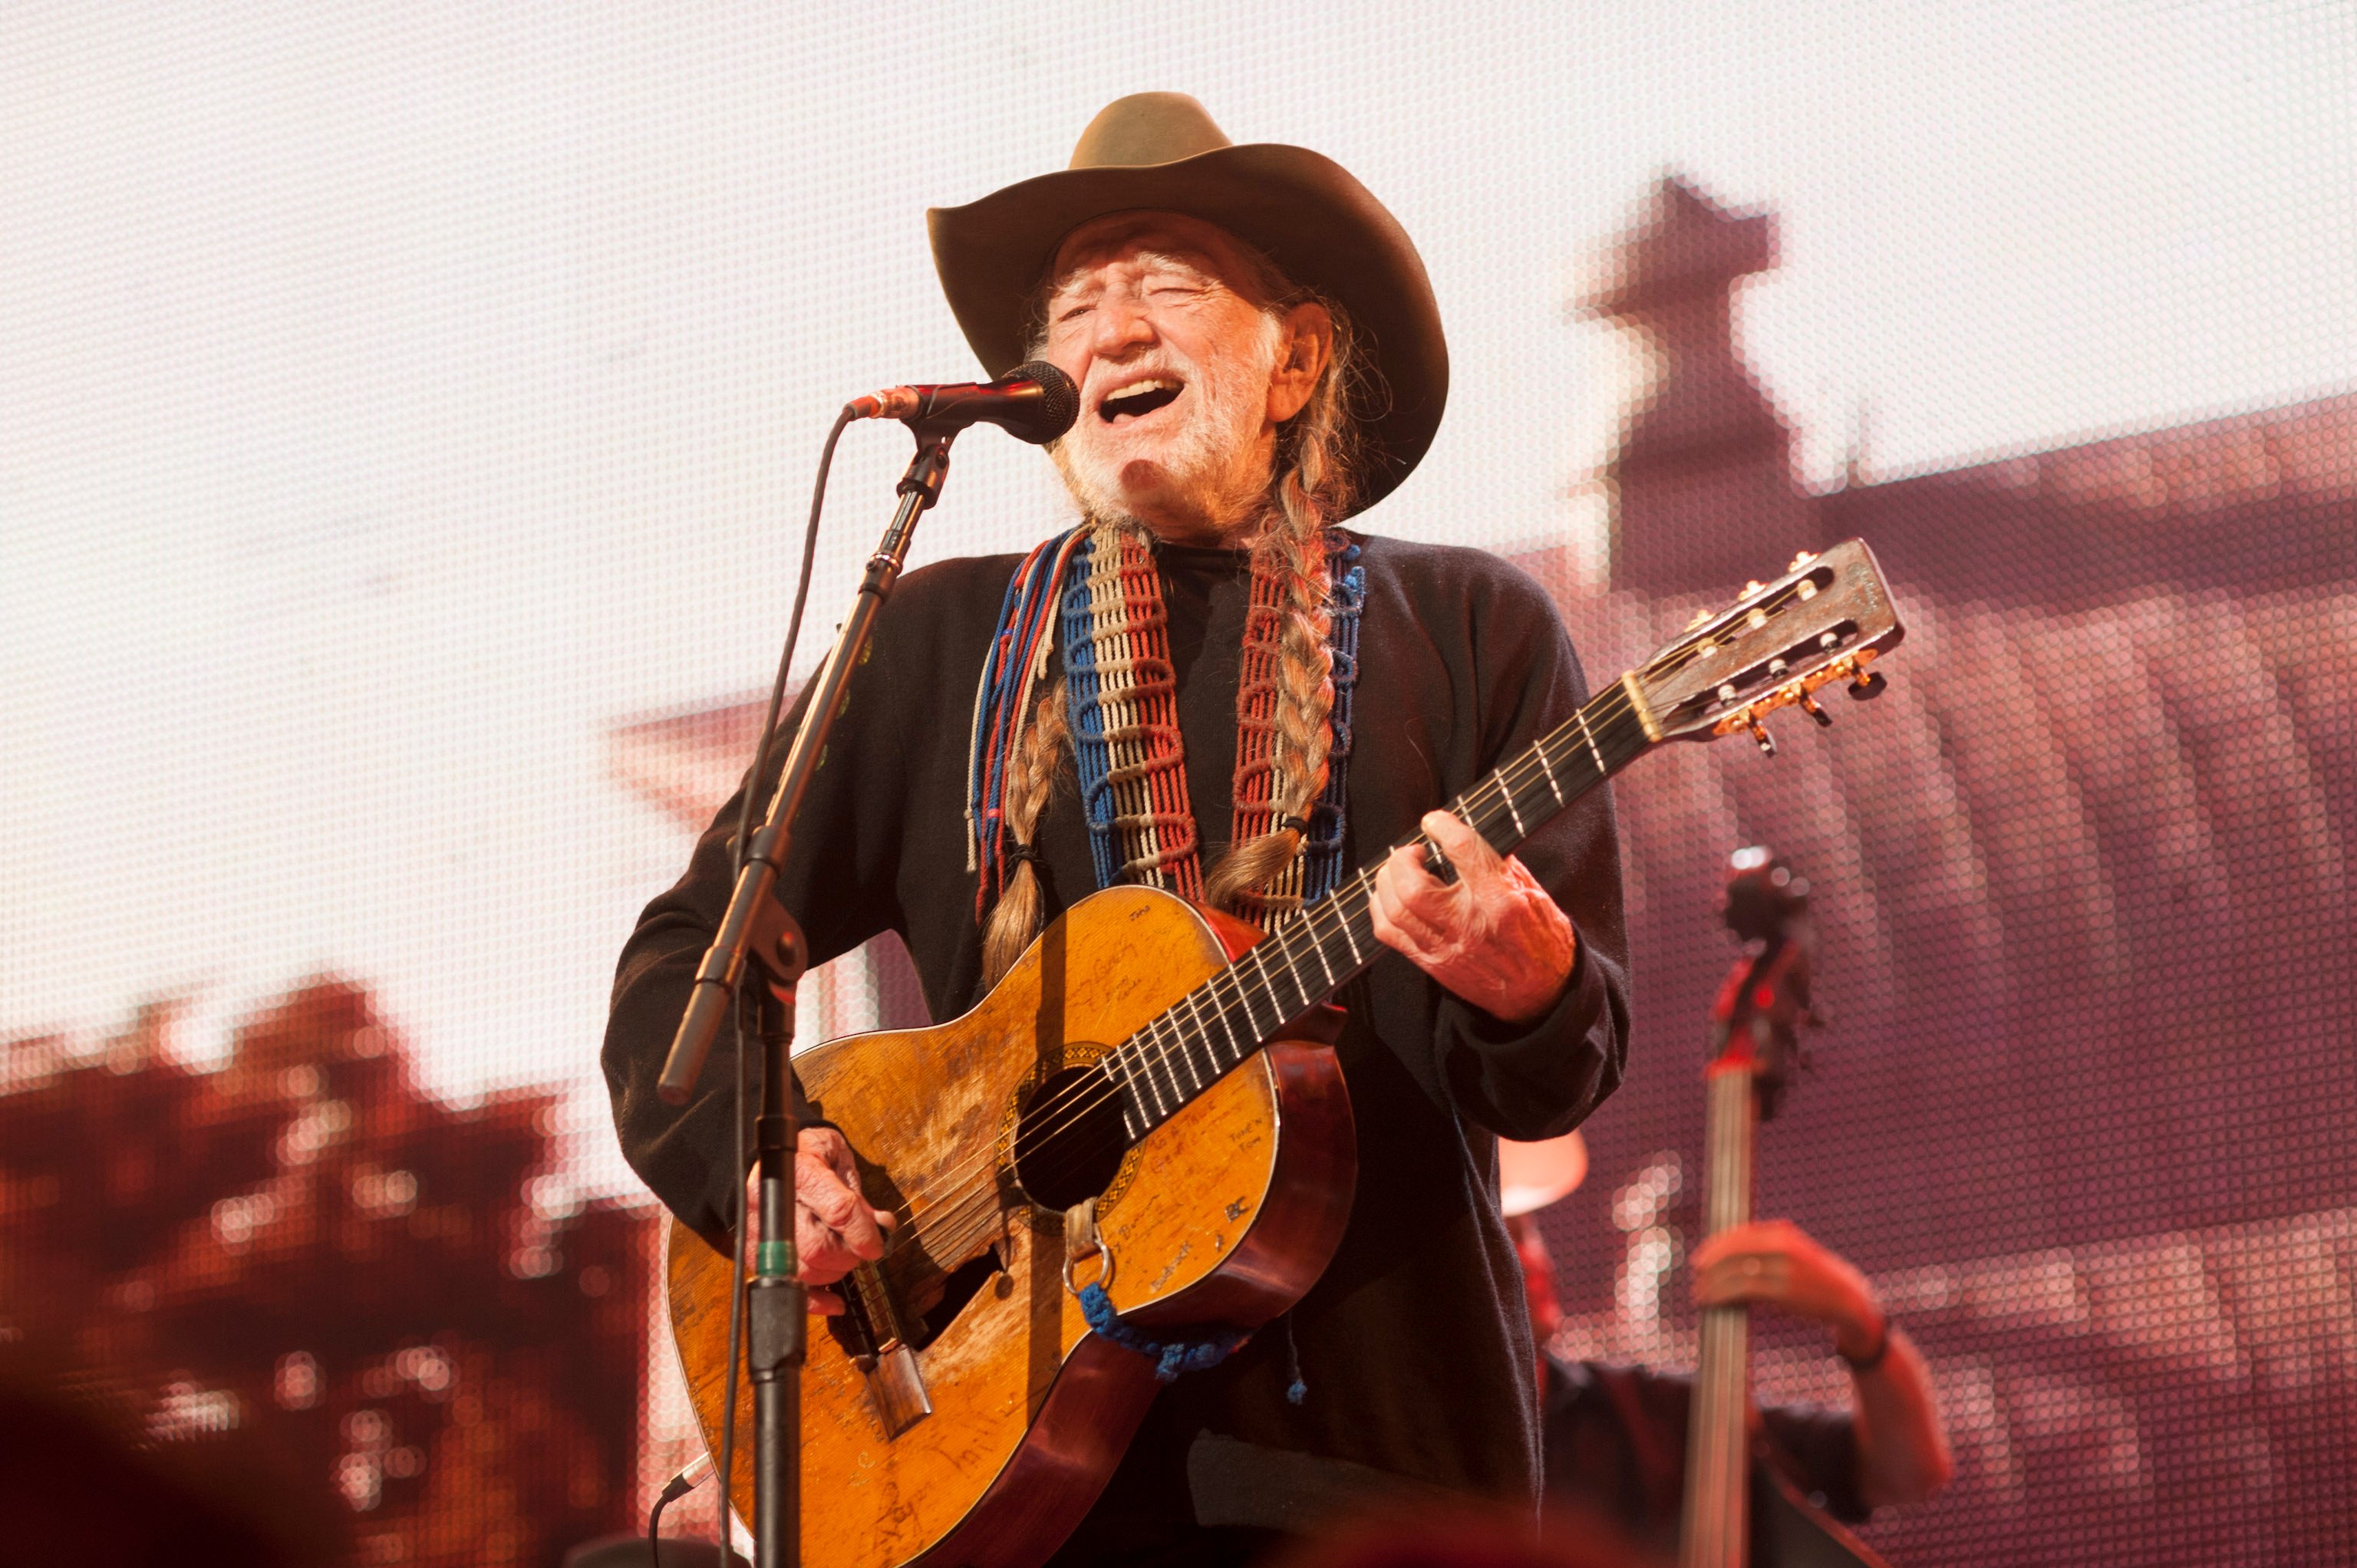 Willie Nelson performs during Farm Aid 2013 at Saratoga Performing Arts Center